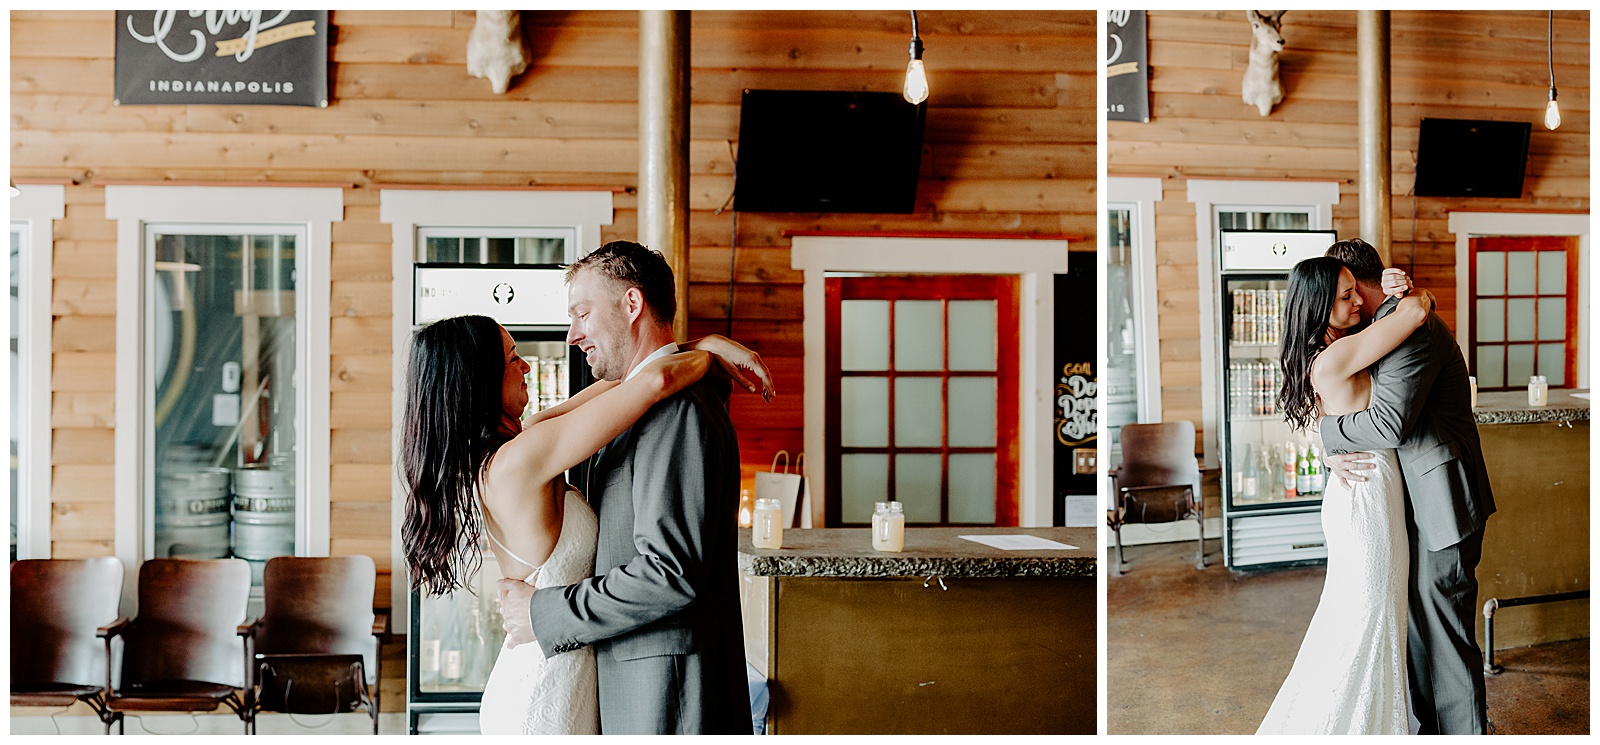 Indiana Wedding Photographer, South Bend Wedding Photographer, Indianapolis Wedding Photographer, Indiana City Brewing, Intimate wedding, Brewery Wedding, Indiana Brewery Wedding, Small wedding, Best Indiana Wedding Photographer, Laid Back Wedding Photographer, Simple wedding, Leah Rife Photo